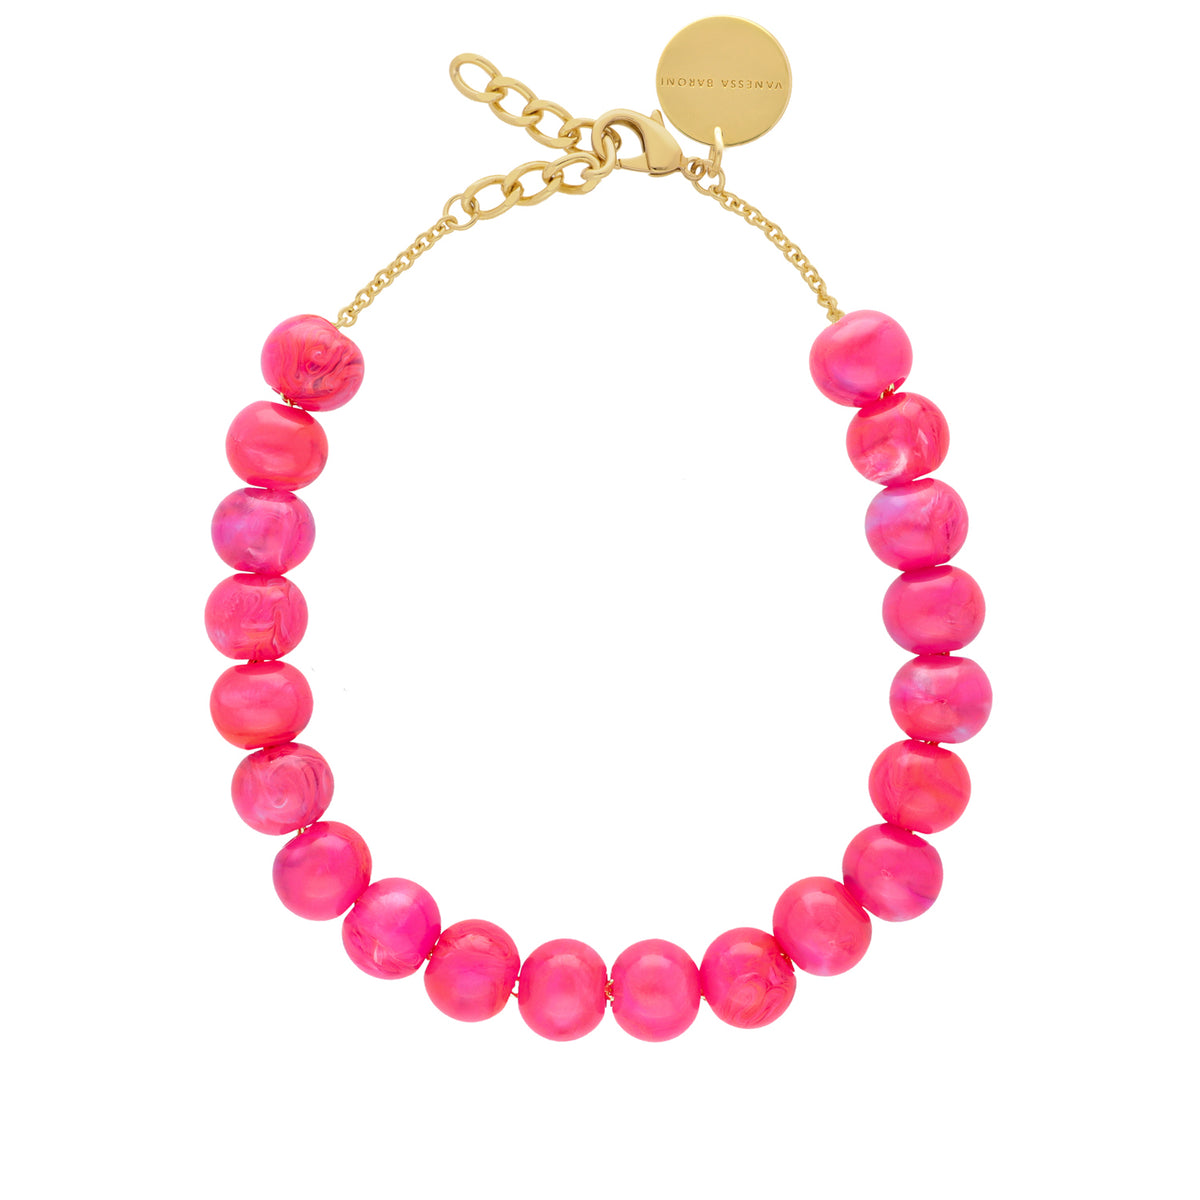 Small Beads Necklace Short Fuchsia Marble